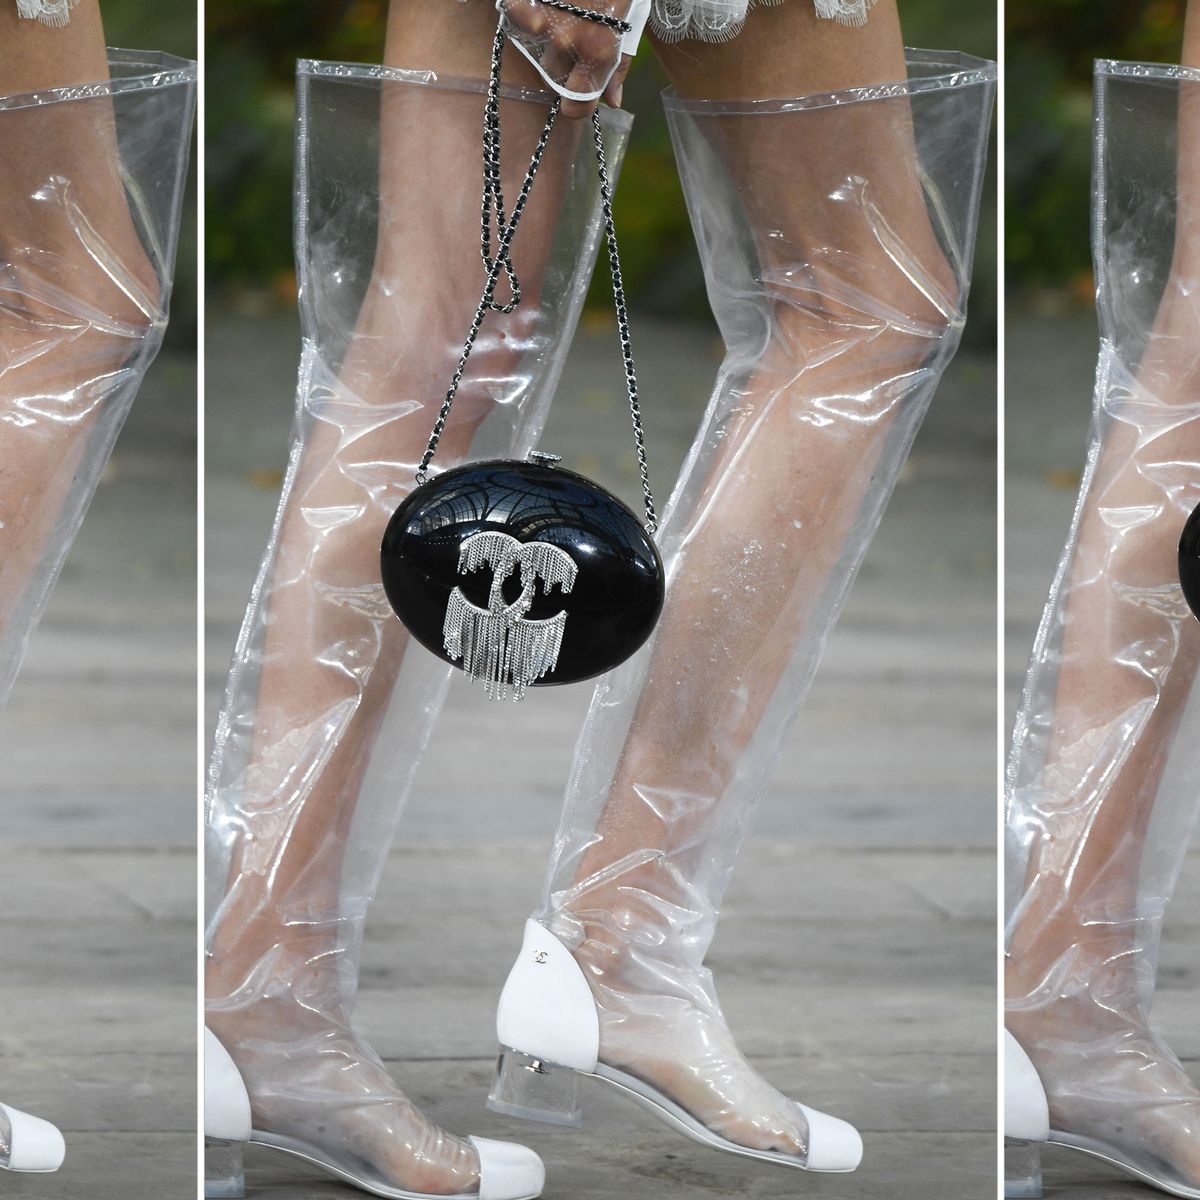 Chanel Clear PVC Rainboots Spring 2018 - Chanel Rainwear and Boots